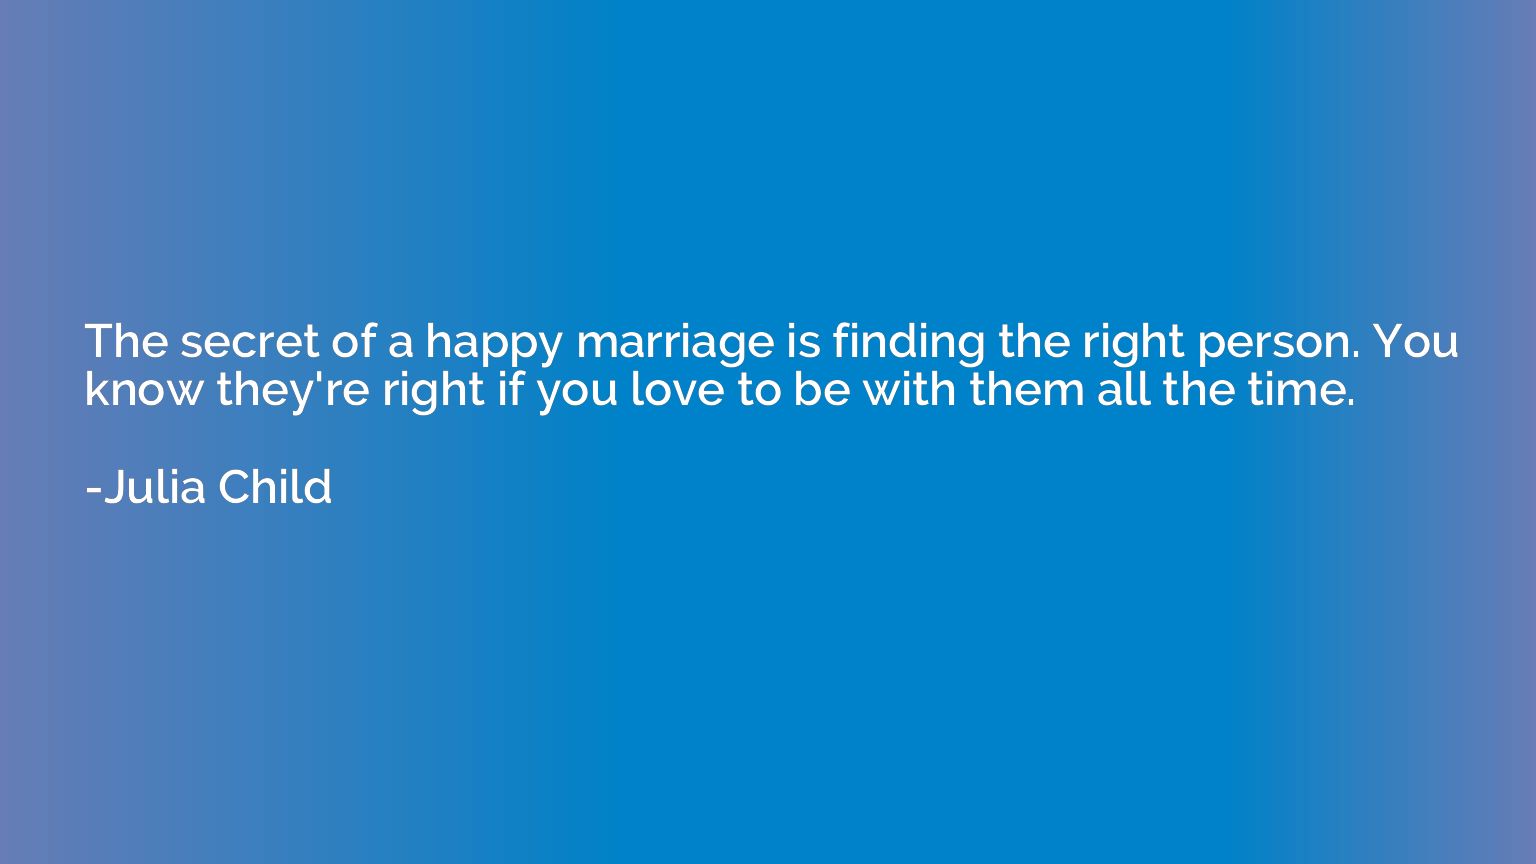 The secret of a happy marriage is finding the right person. 